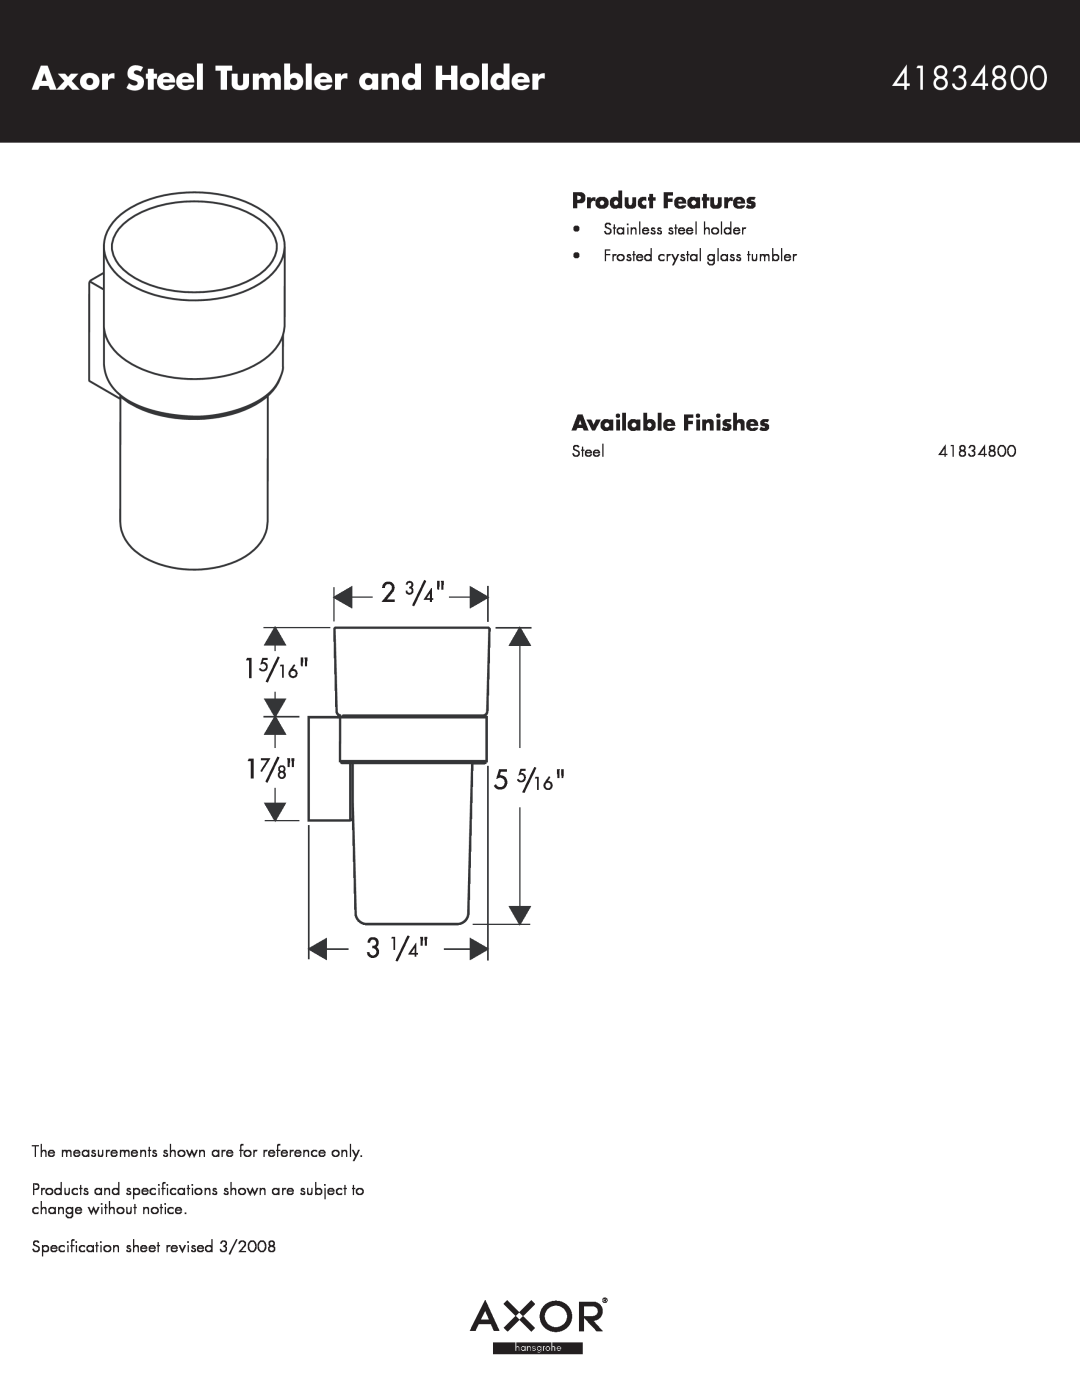 Axor 41834800 specifications Axor Steel Tumbler and Holder, Product Features, Available Finishes 